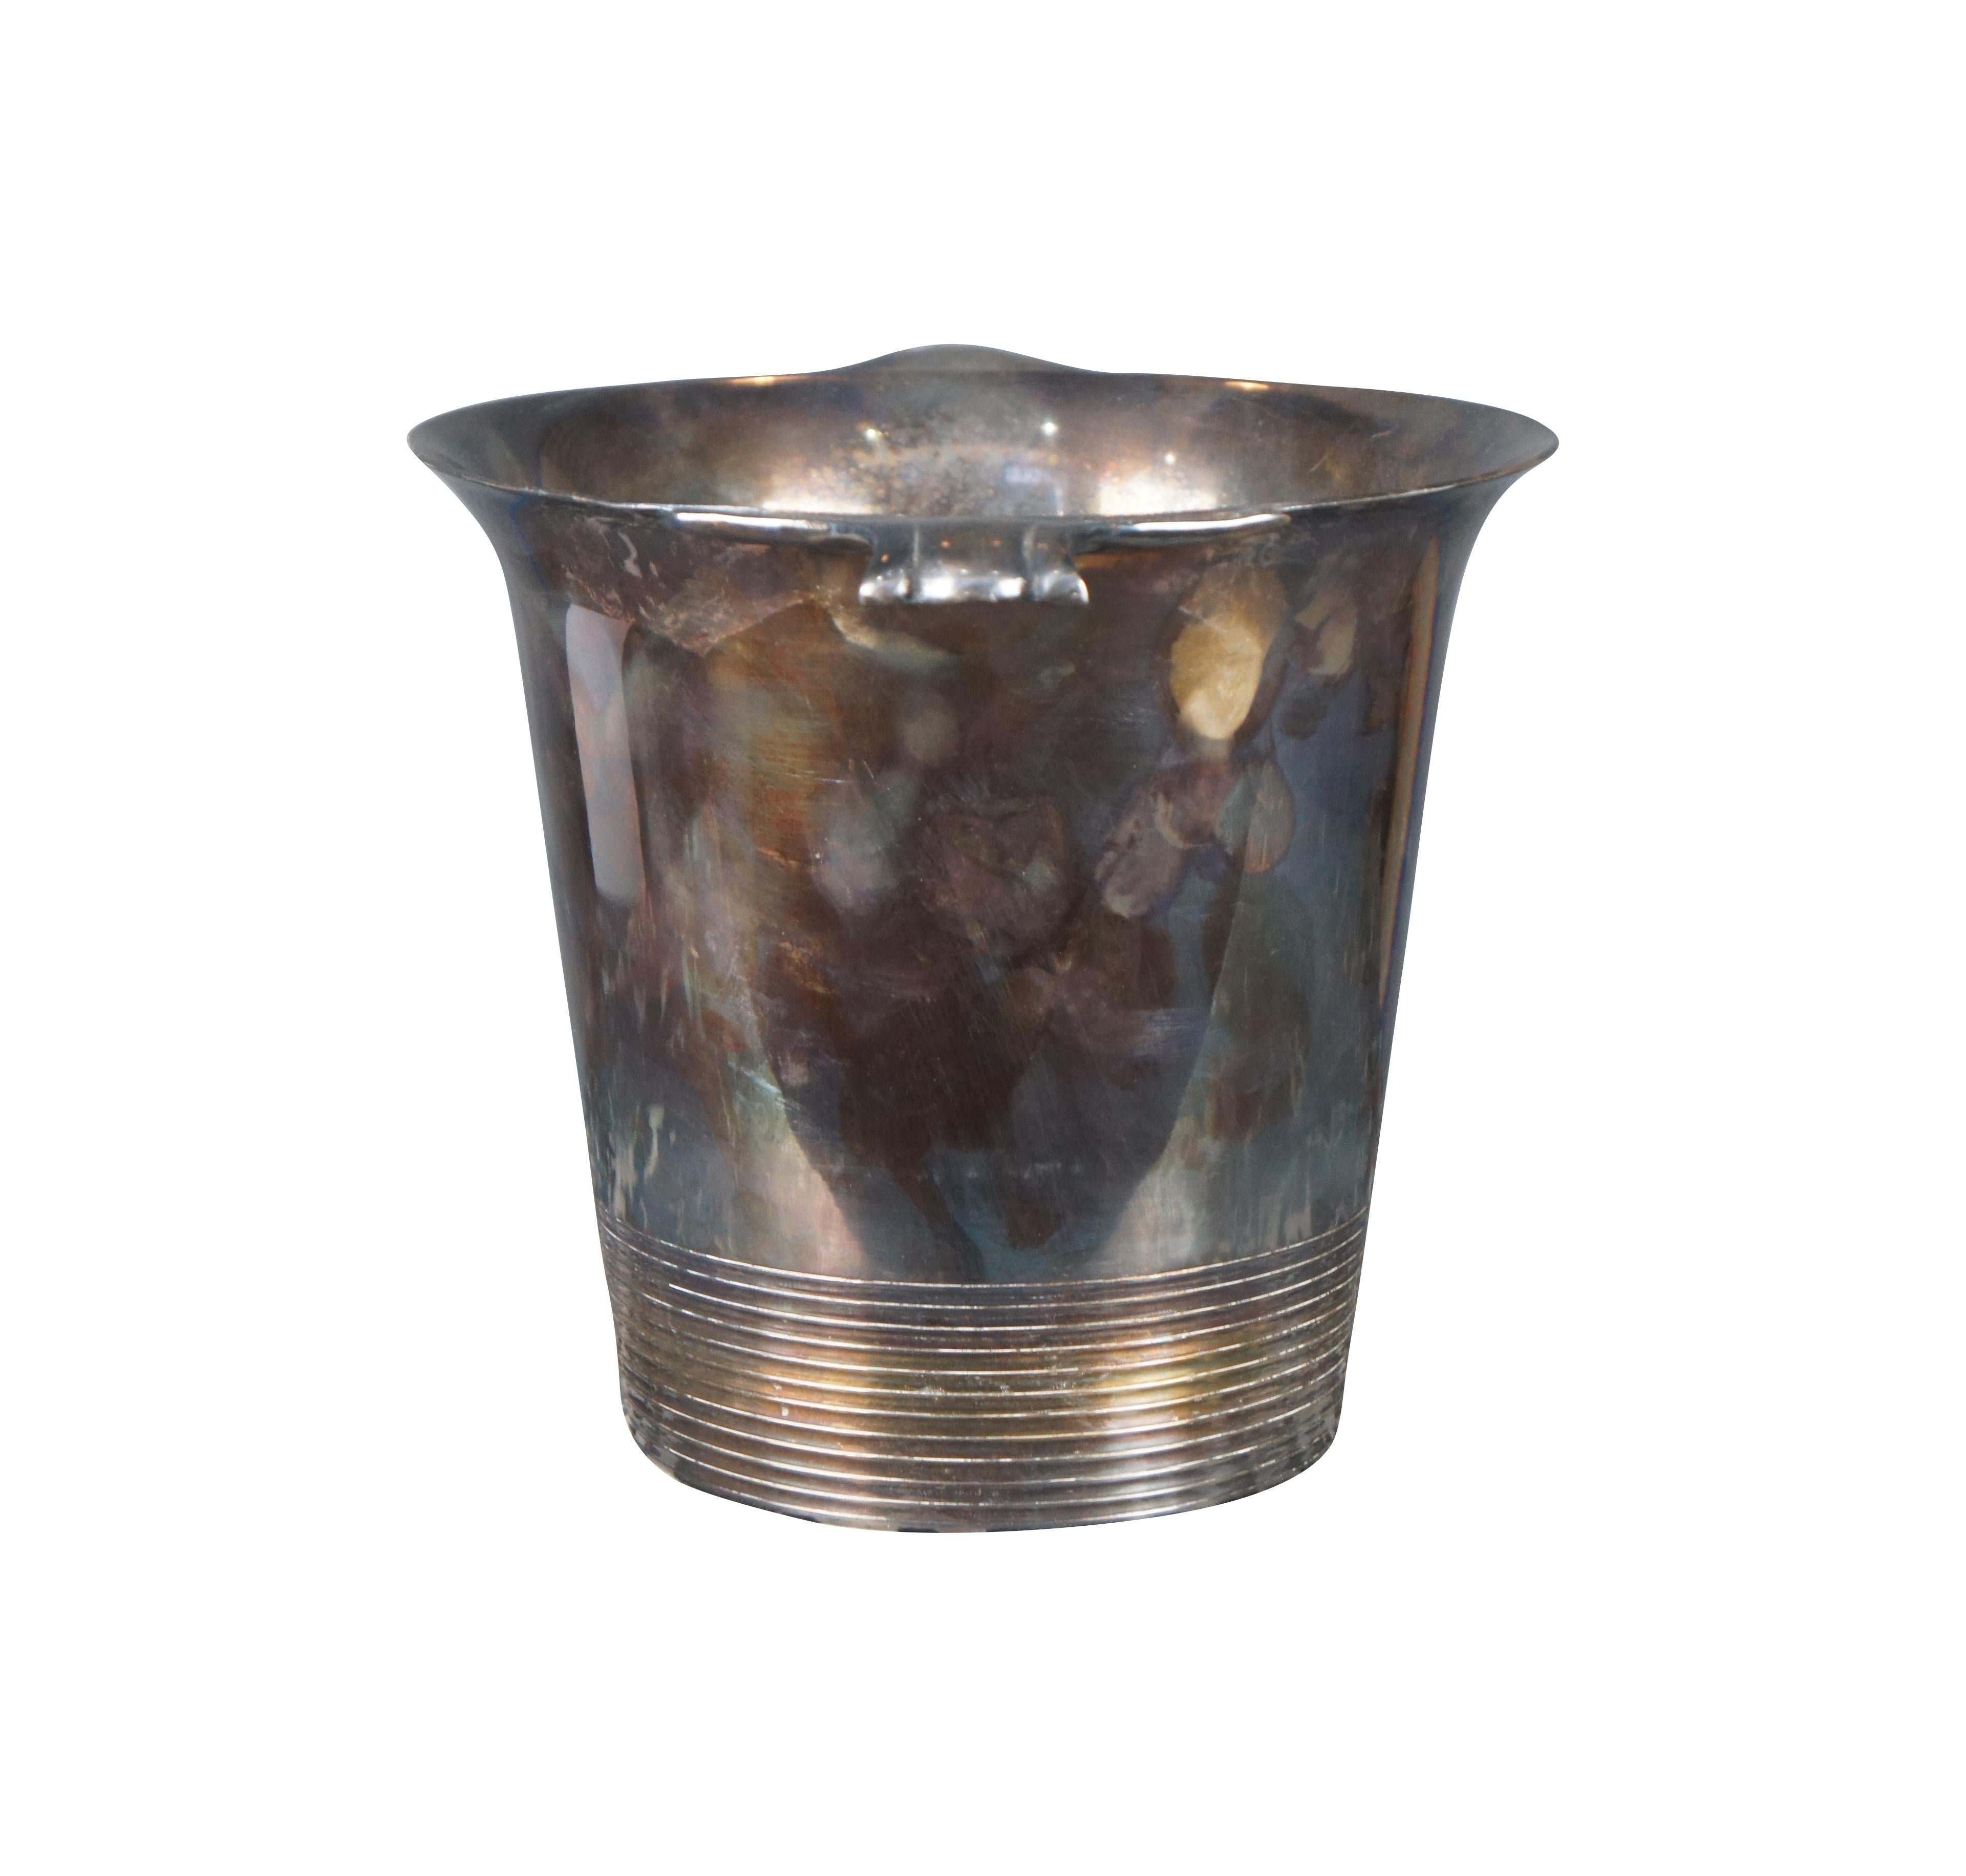 Art Deco Champagne / Wine Cooler or Ice Bucket. Features a flared shape with handles along the top and ribbing at the base.

Dimensions:
11.5